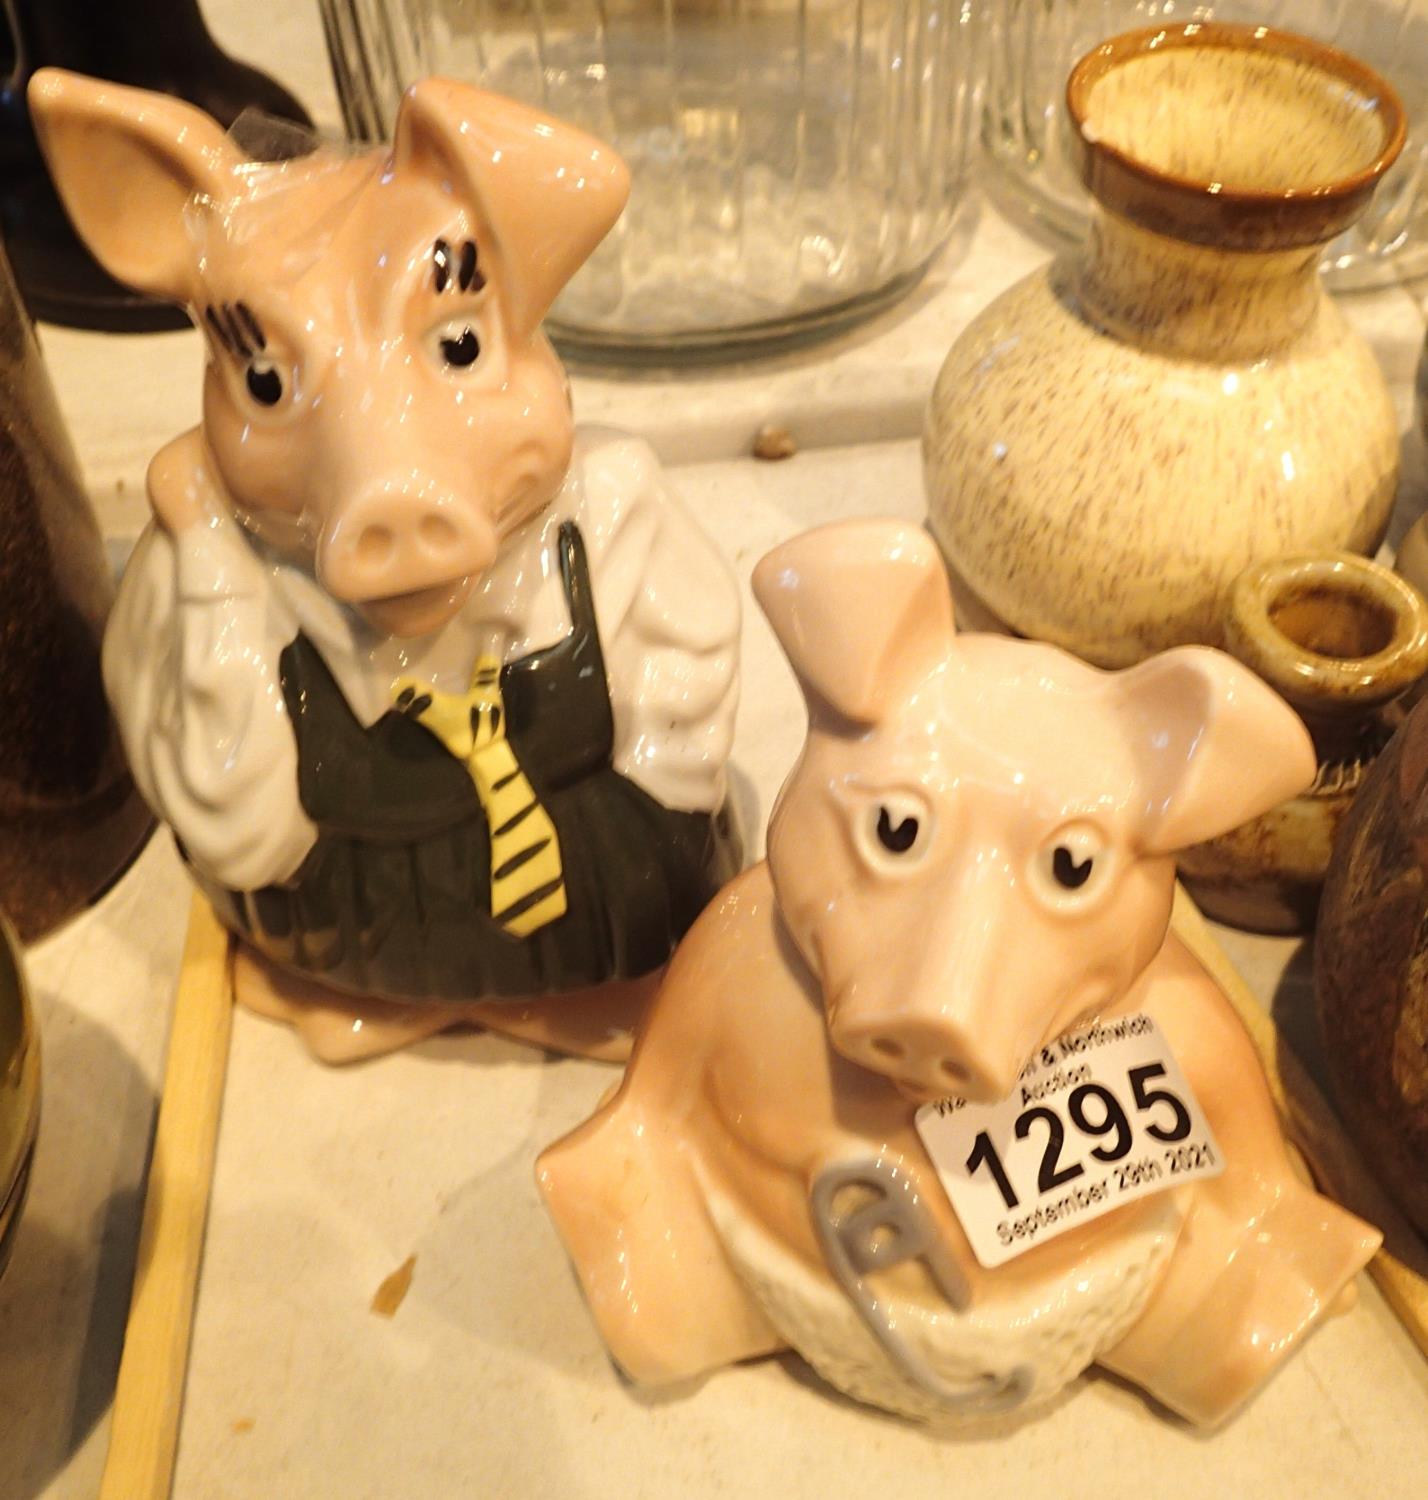 Two original Natwest piggy banks, one with stopper. Not available for in-house P&P, contact Paul O'